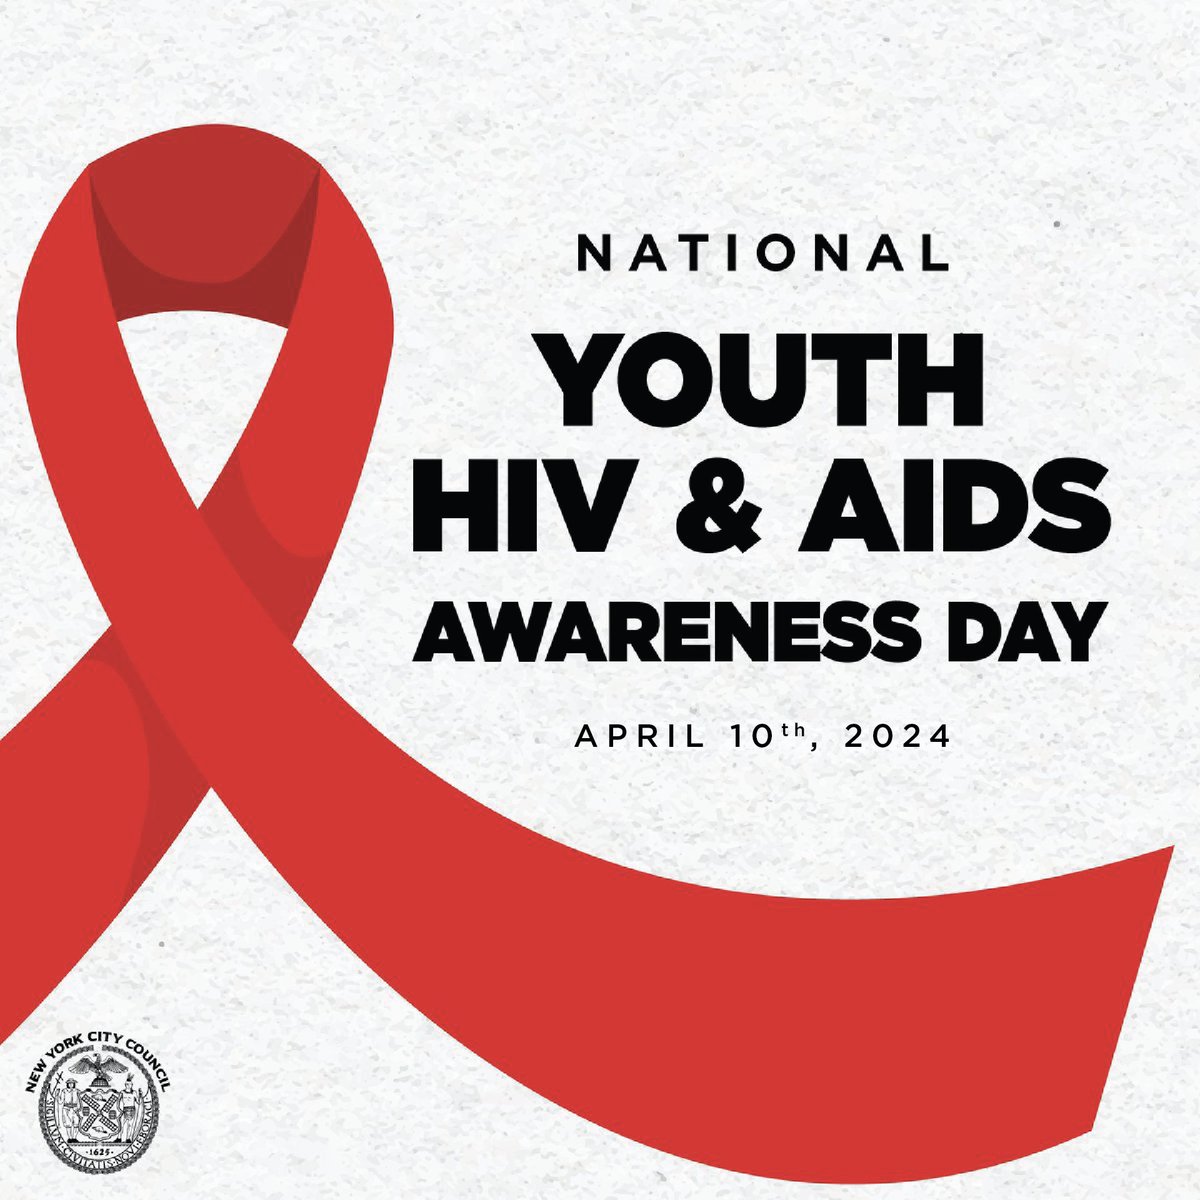 20% of new HIV diagnoses in the U.S. are young people ages 13-24. Regular testing is critical to our health, and it’s up to all of us to encourage young people to take preventive measures. #NYHAAD For more information on Youth Health Centers, visit nycyouthhealth.org/html/index.sht…